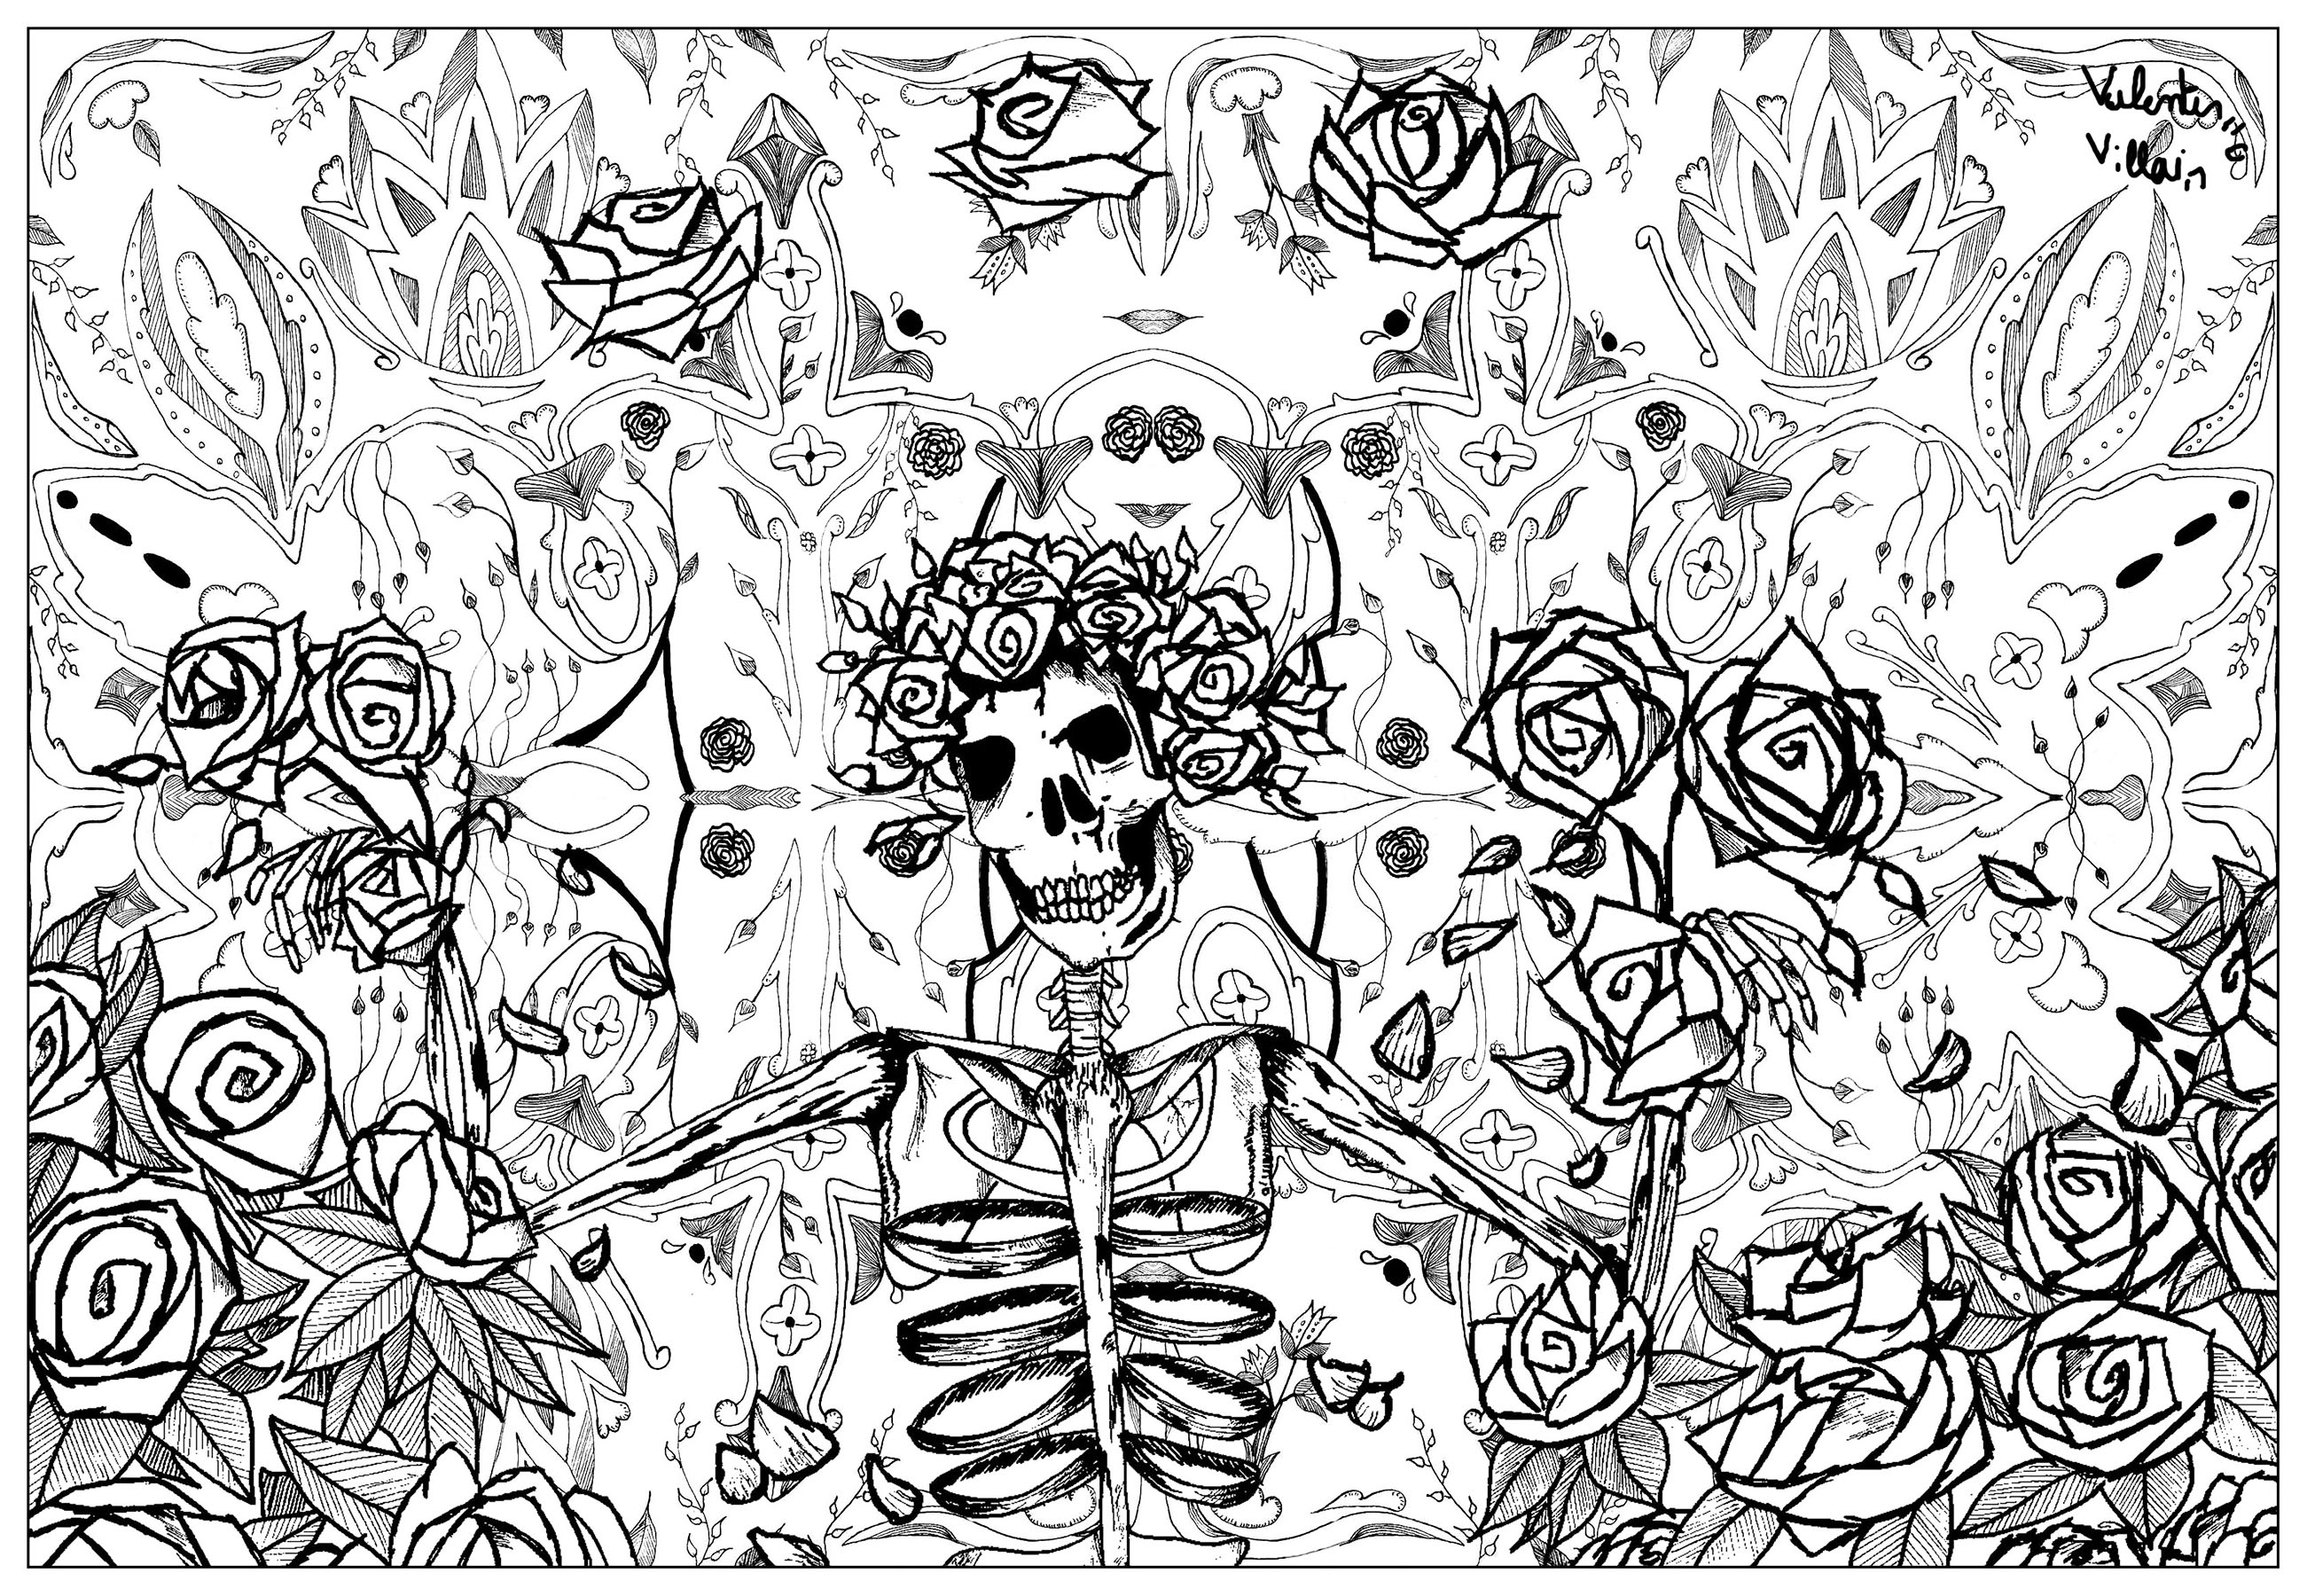 grateful-dead-psychedelic-adult-coloring-pages